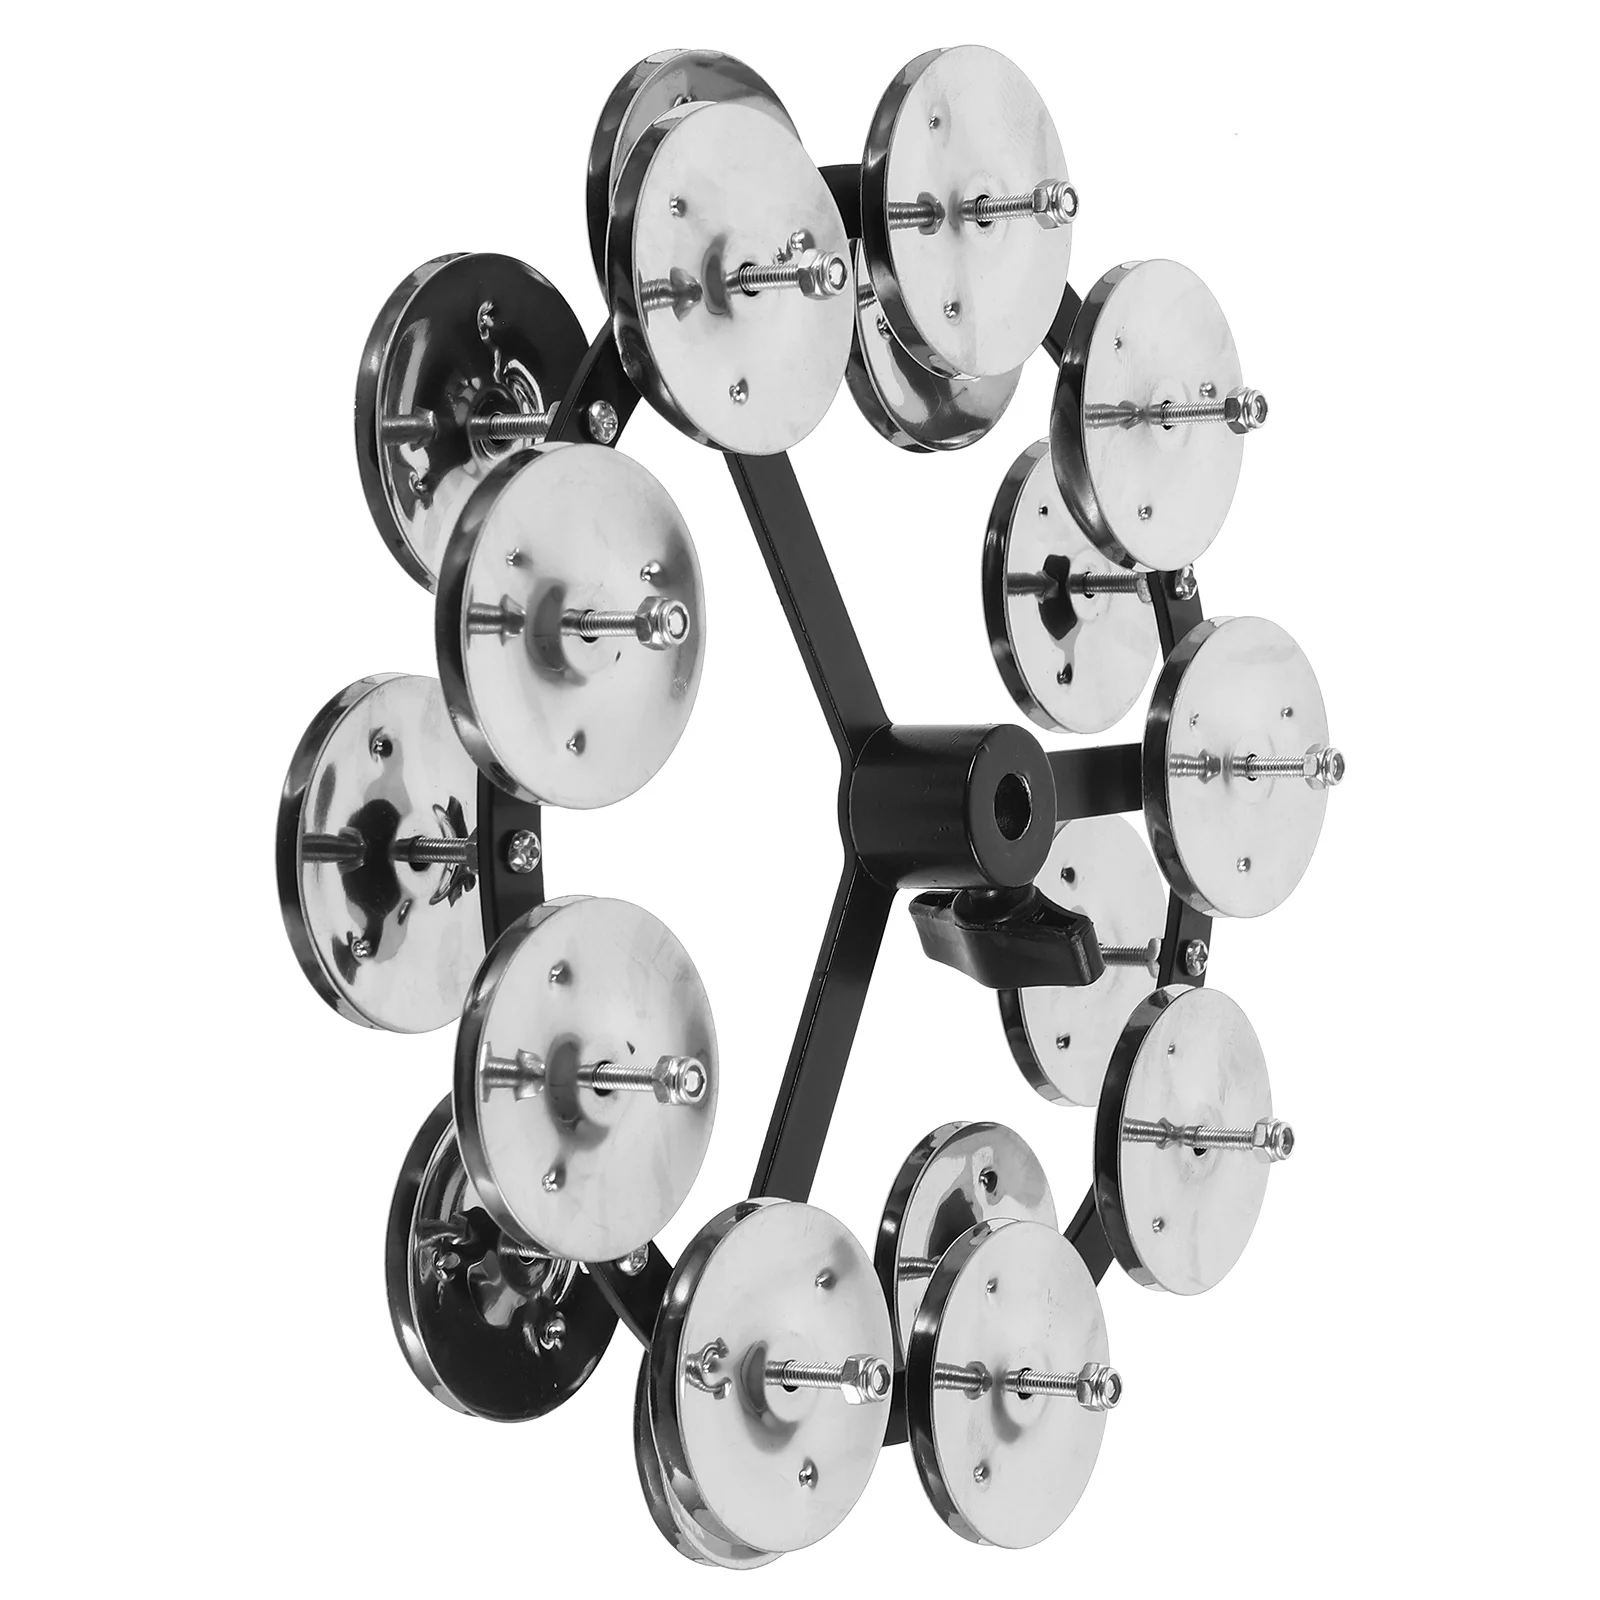 

Drum Kit Step on The Bell Cymbal Tambourines Hihat Percussion for Drums Supply Stainless Steel Double Row